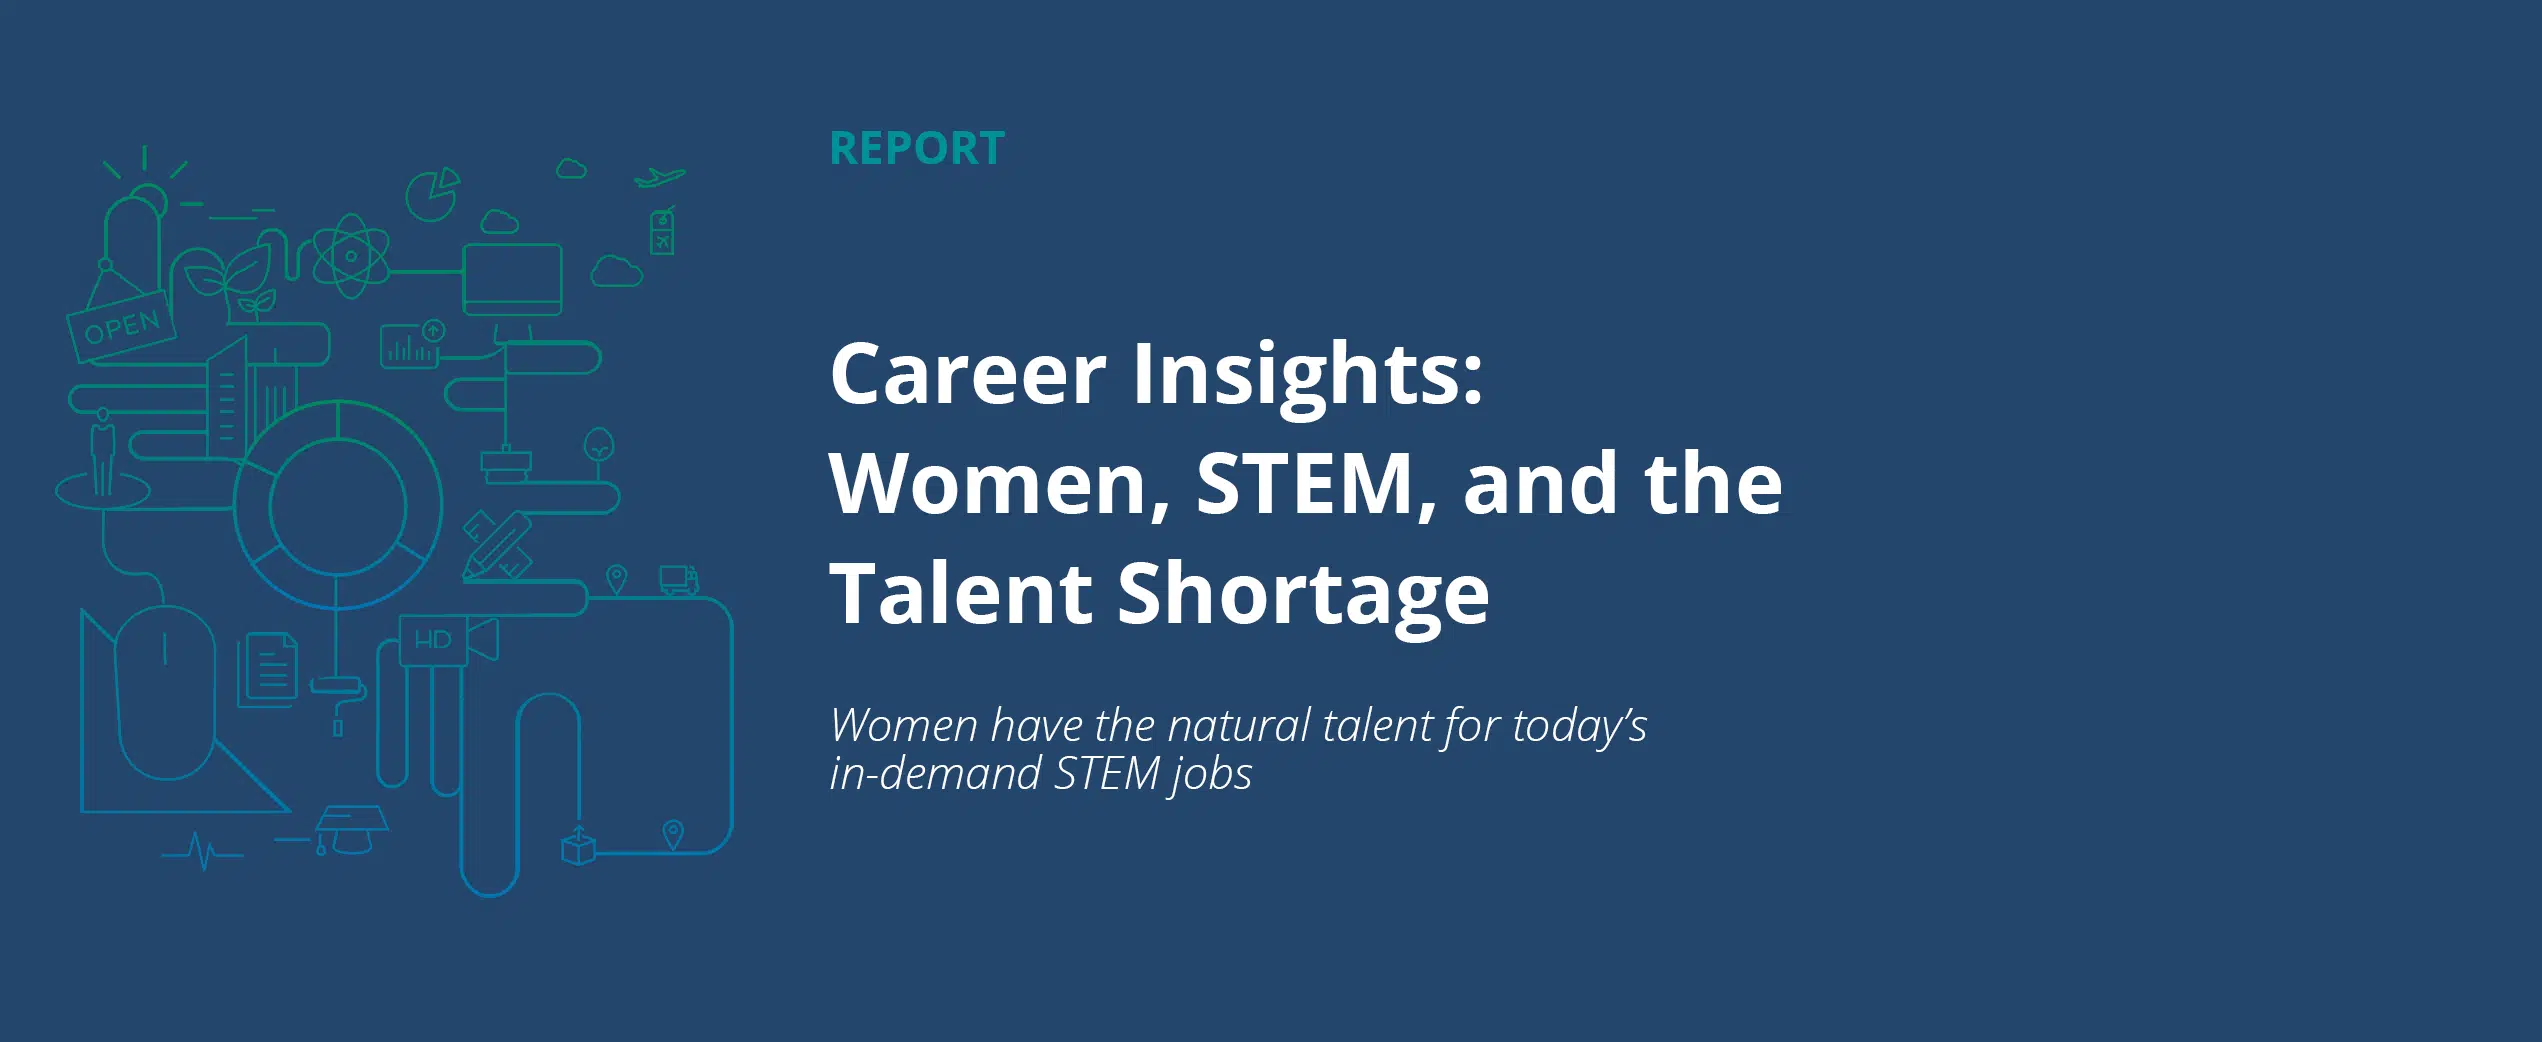 Career Insights: Women, STEM, and the Talent Shortage header image